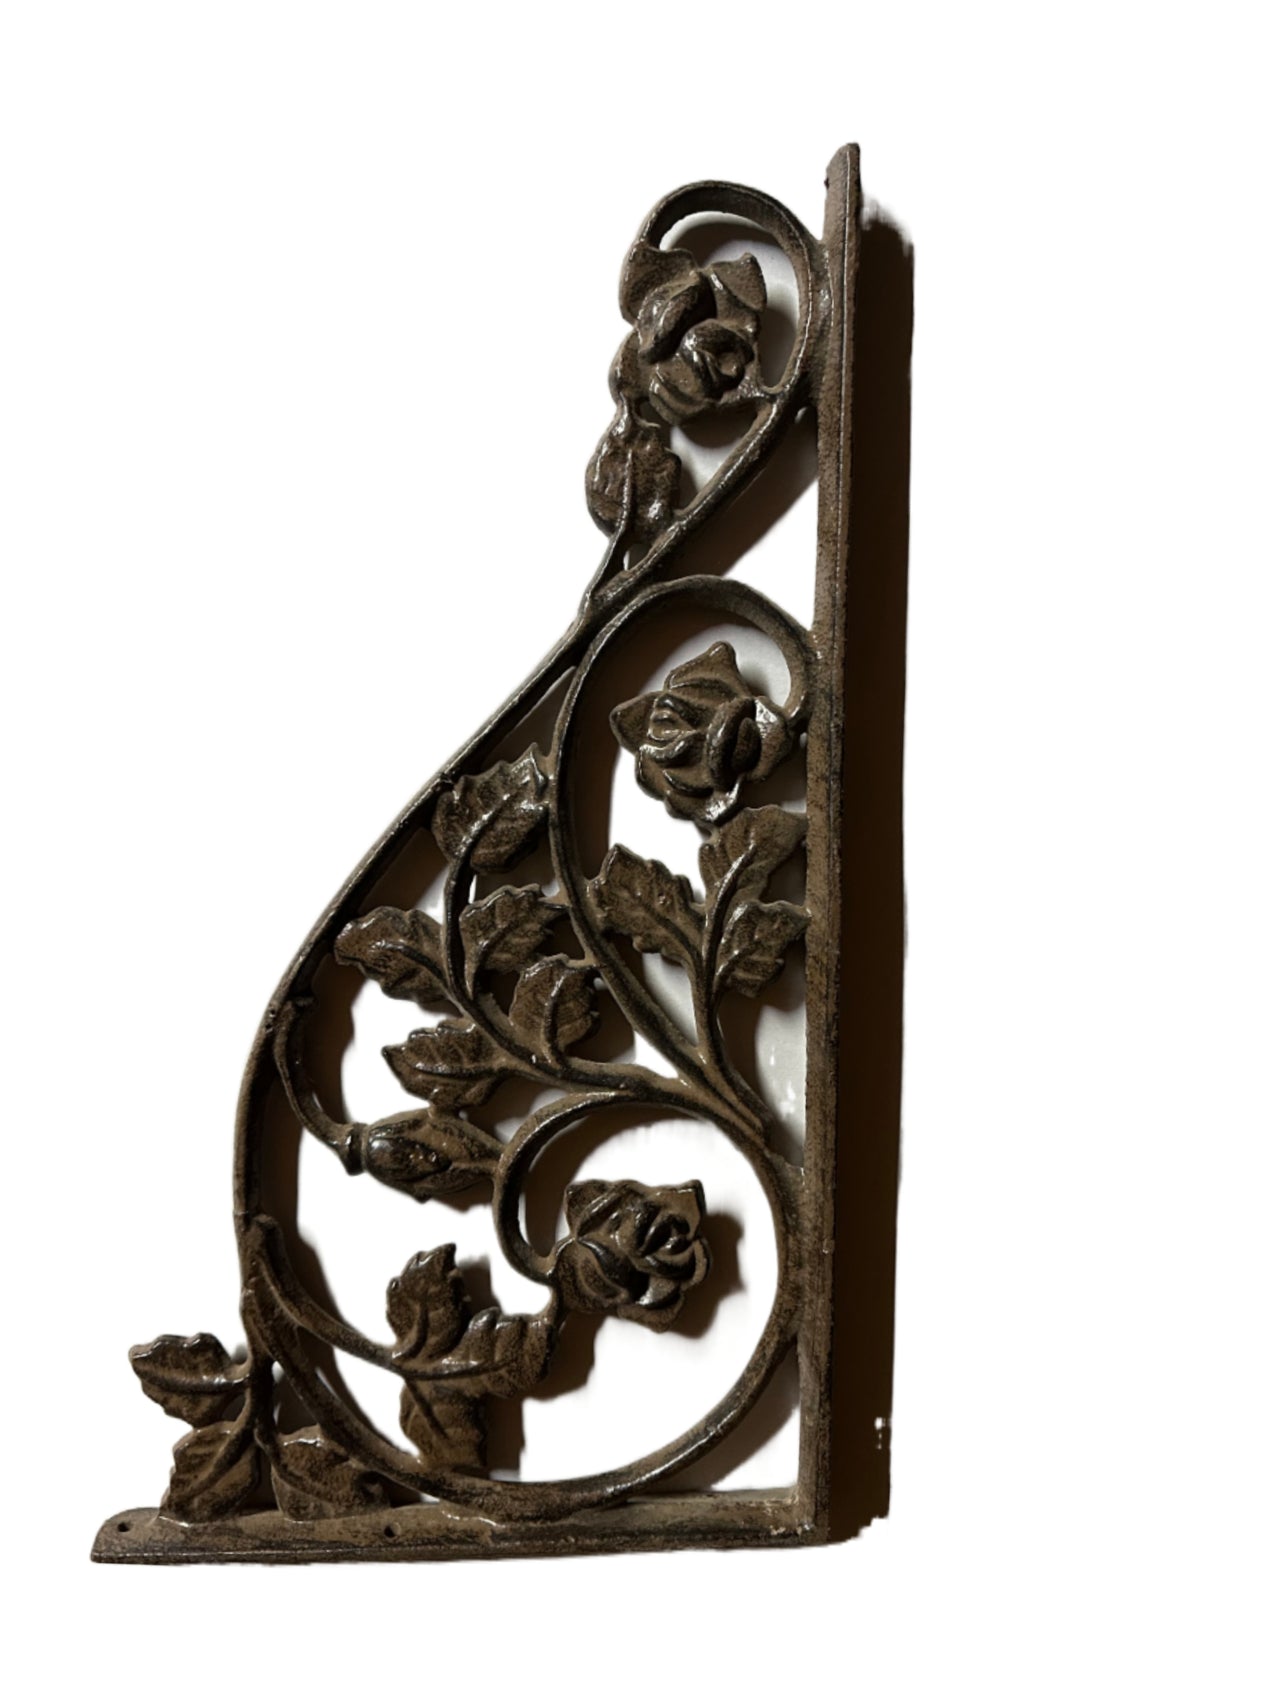 Climbing Rose Extra Large Shelving or Countertop Bracket. Heavy Duty Cast Iron without sacrificing style!